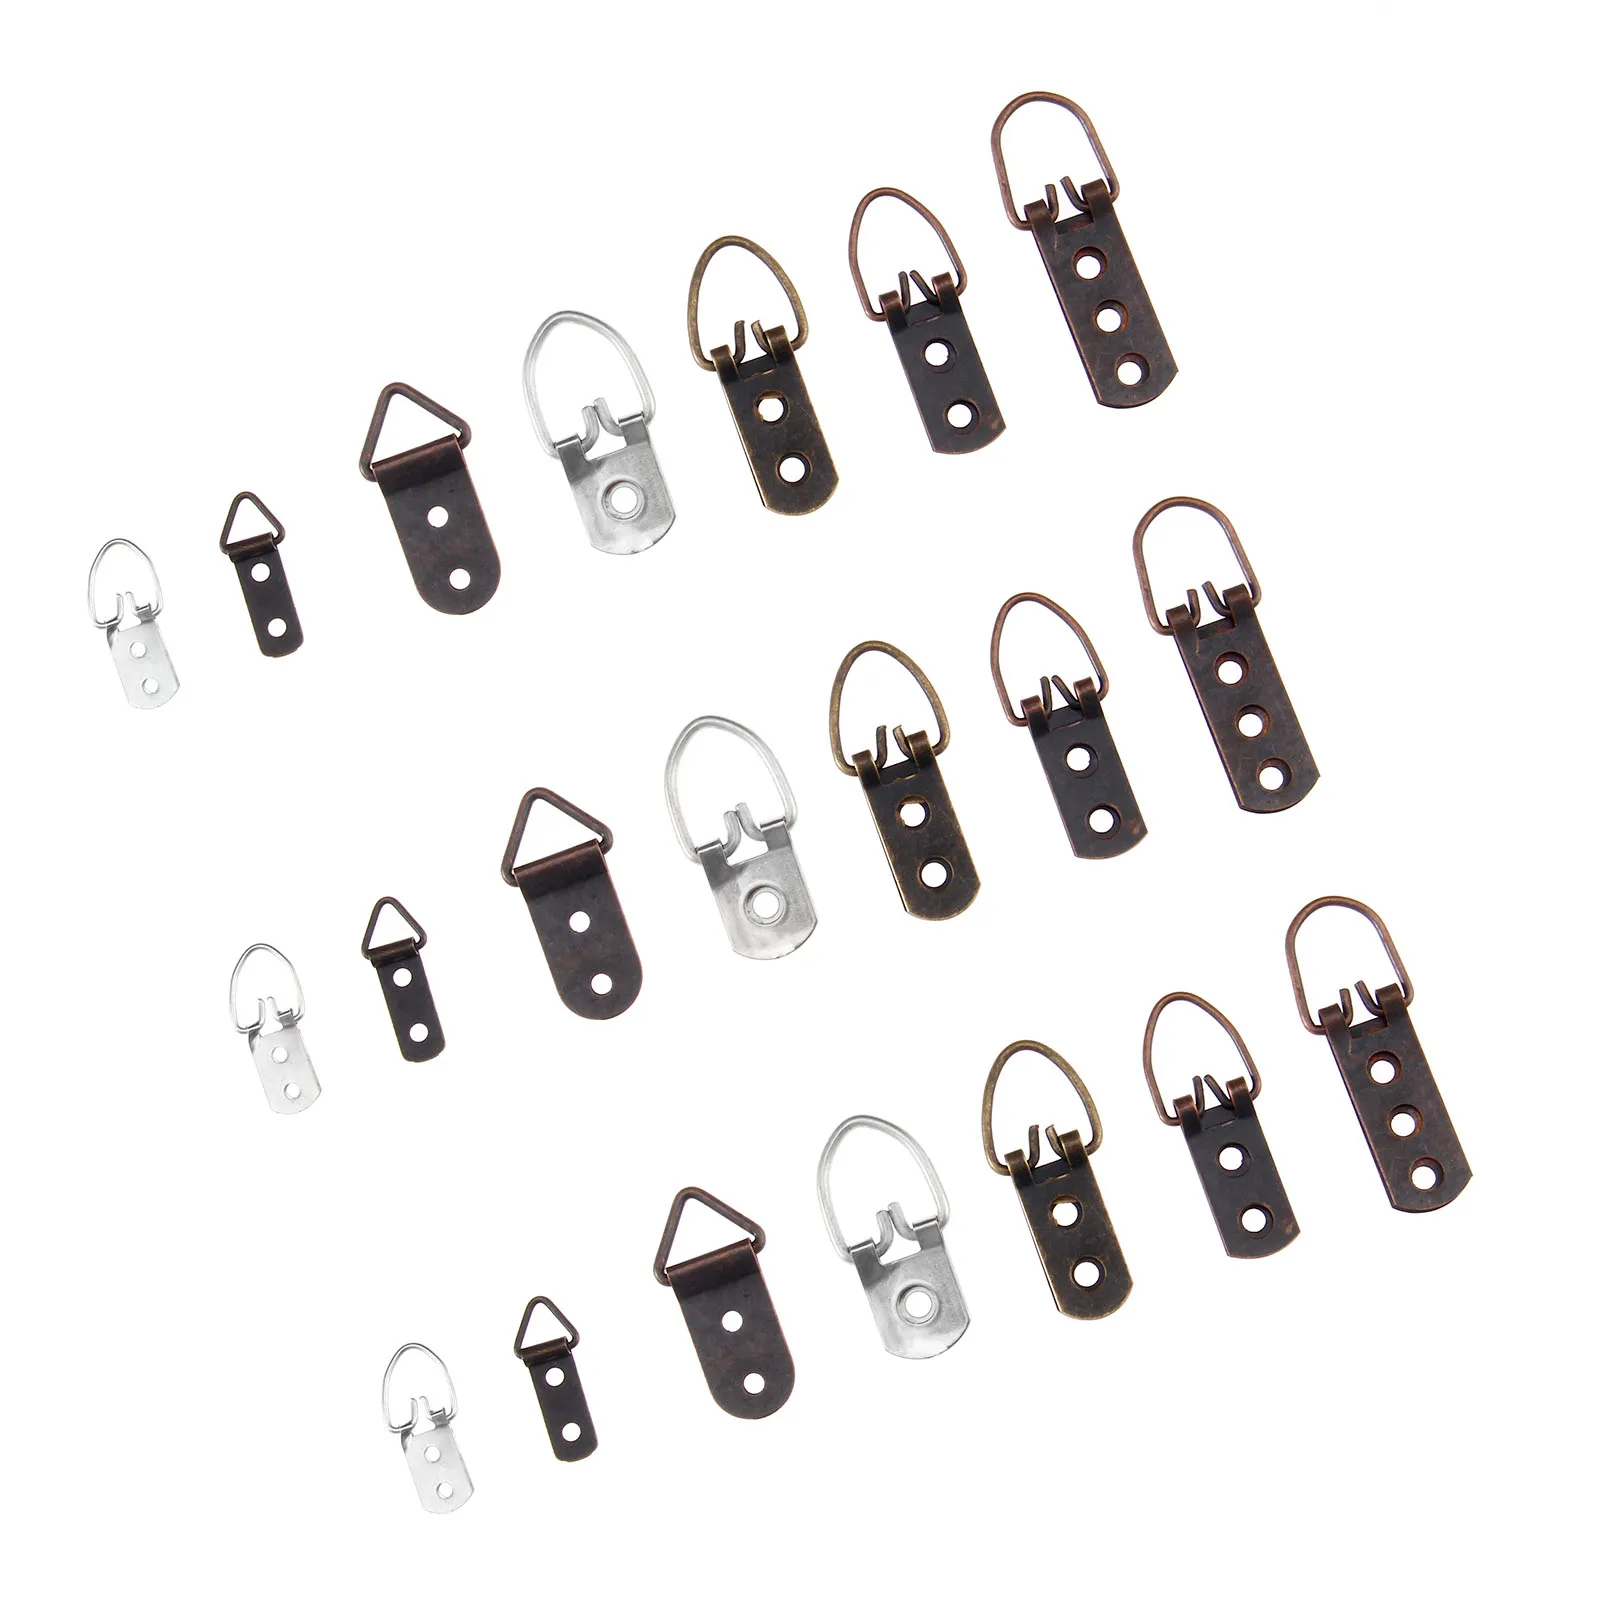 5/20Pcs Zinc Alloy Home Hooks D-Ring Hanging Picture Photo Oil Painting Mirror Frame Hooks Hanger with Screws Furniture Hardware